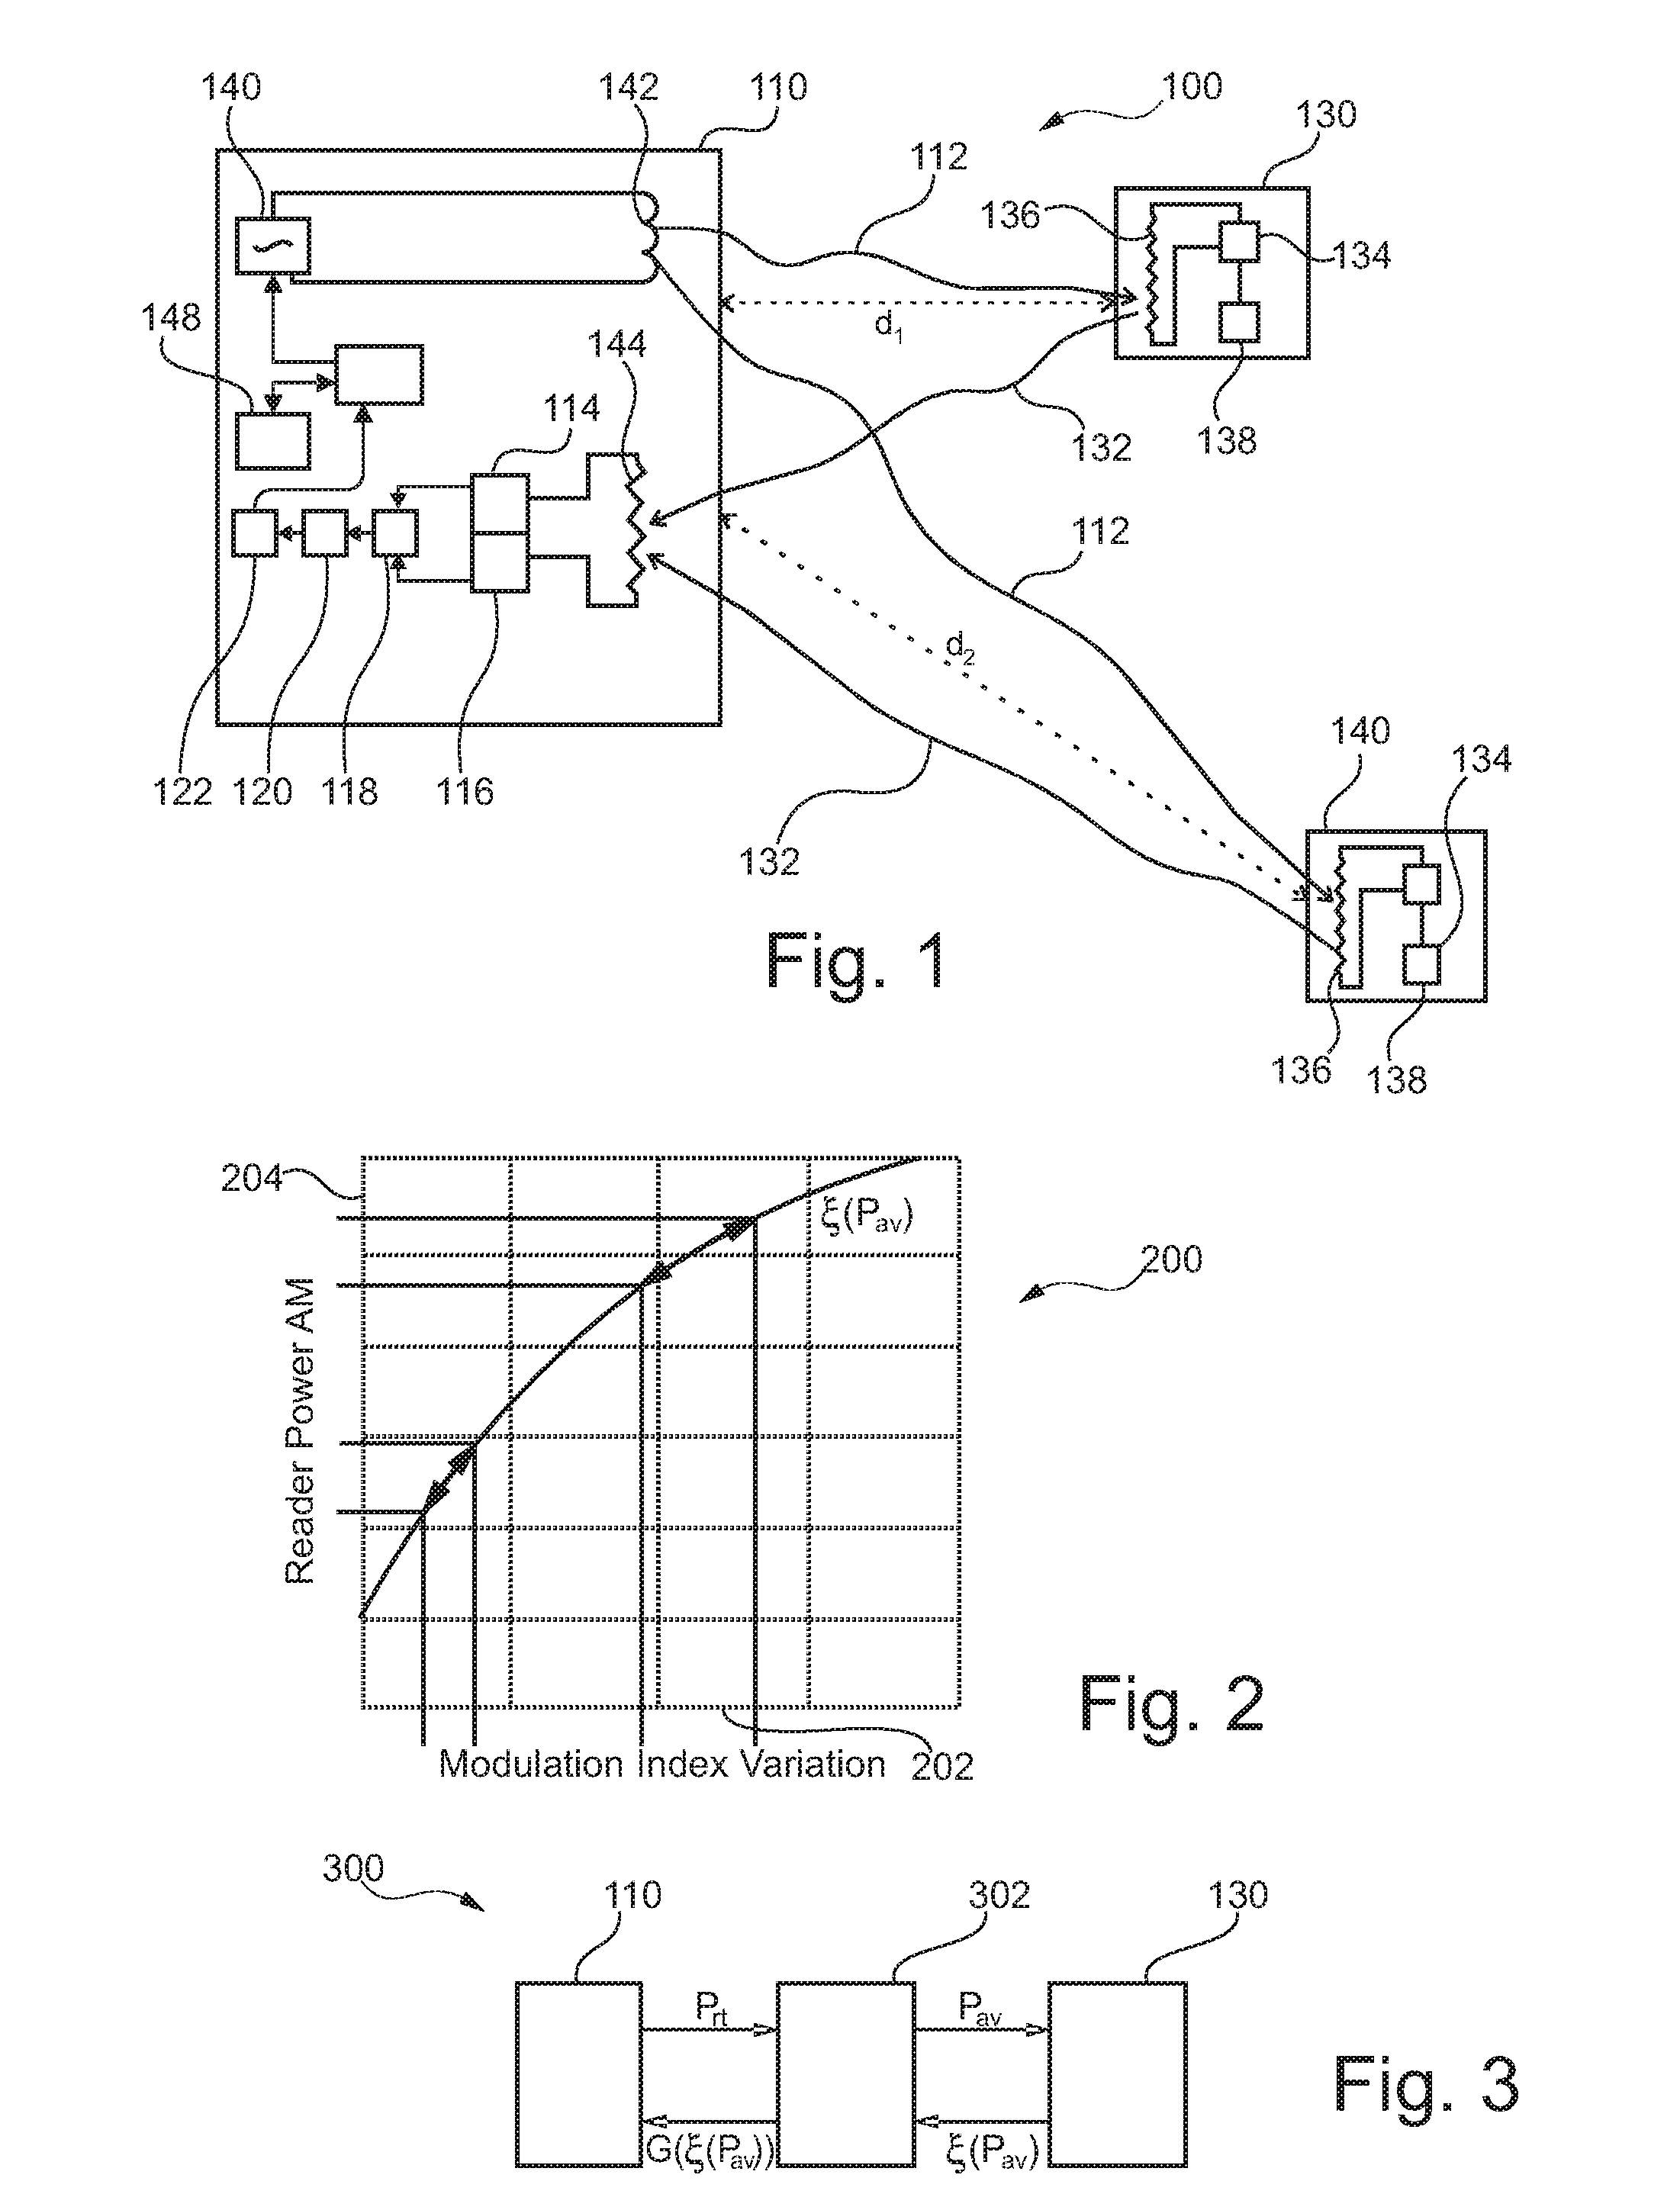  system for reading information transmitted from a transponder